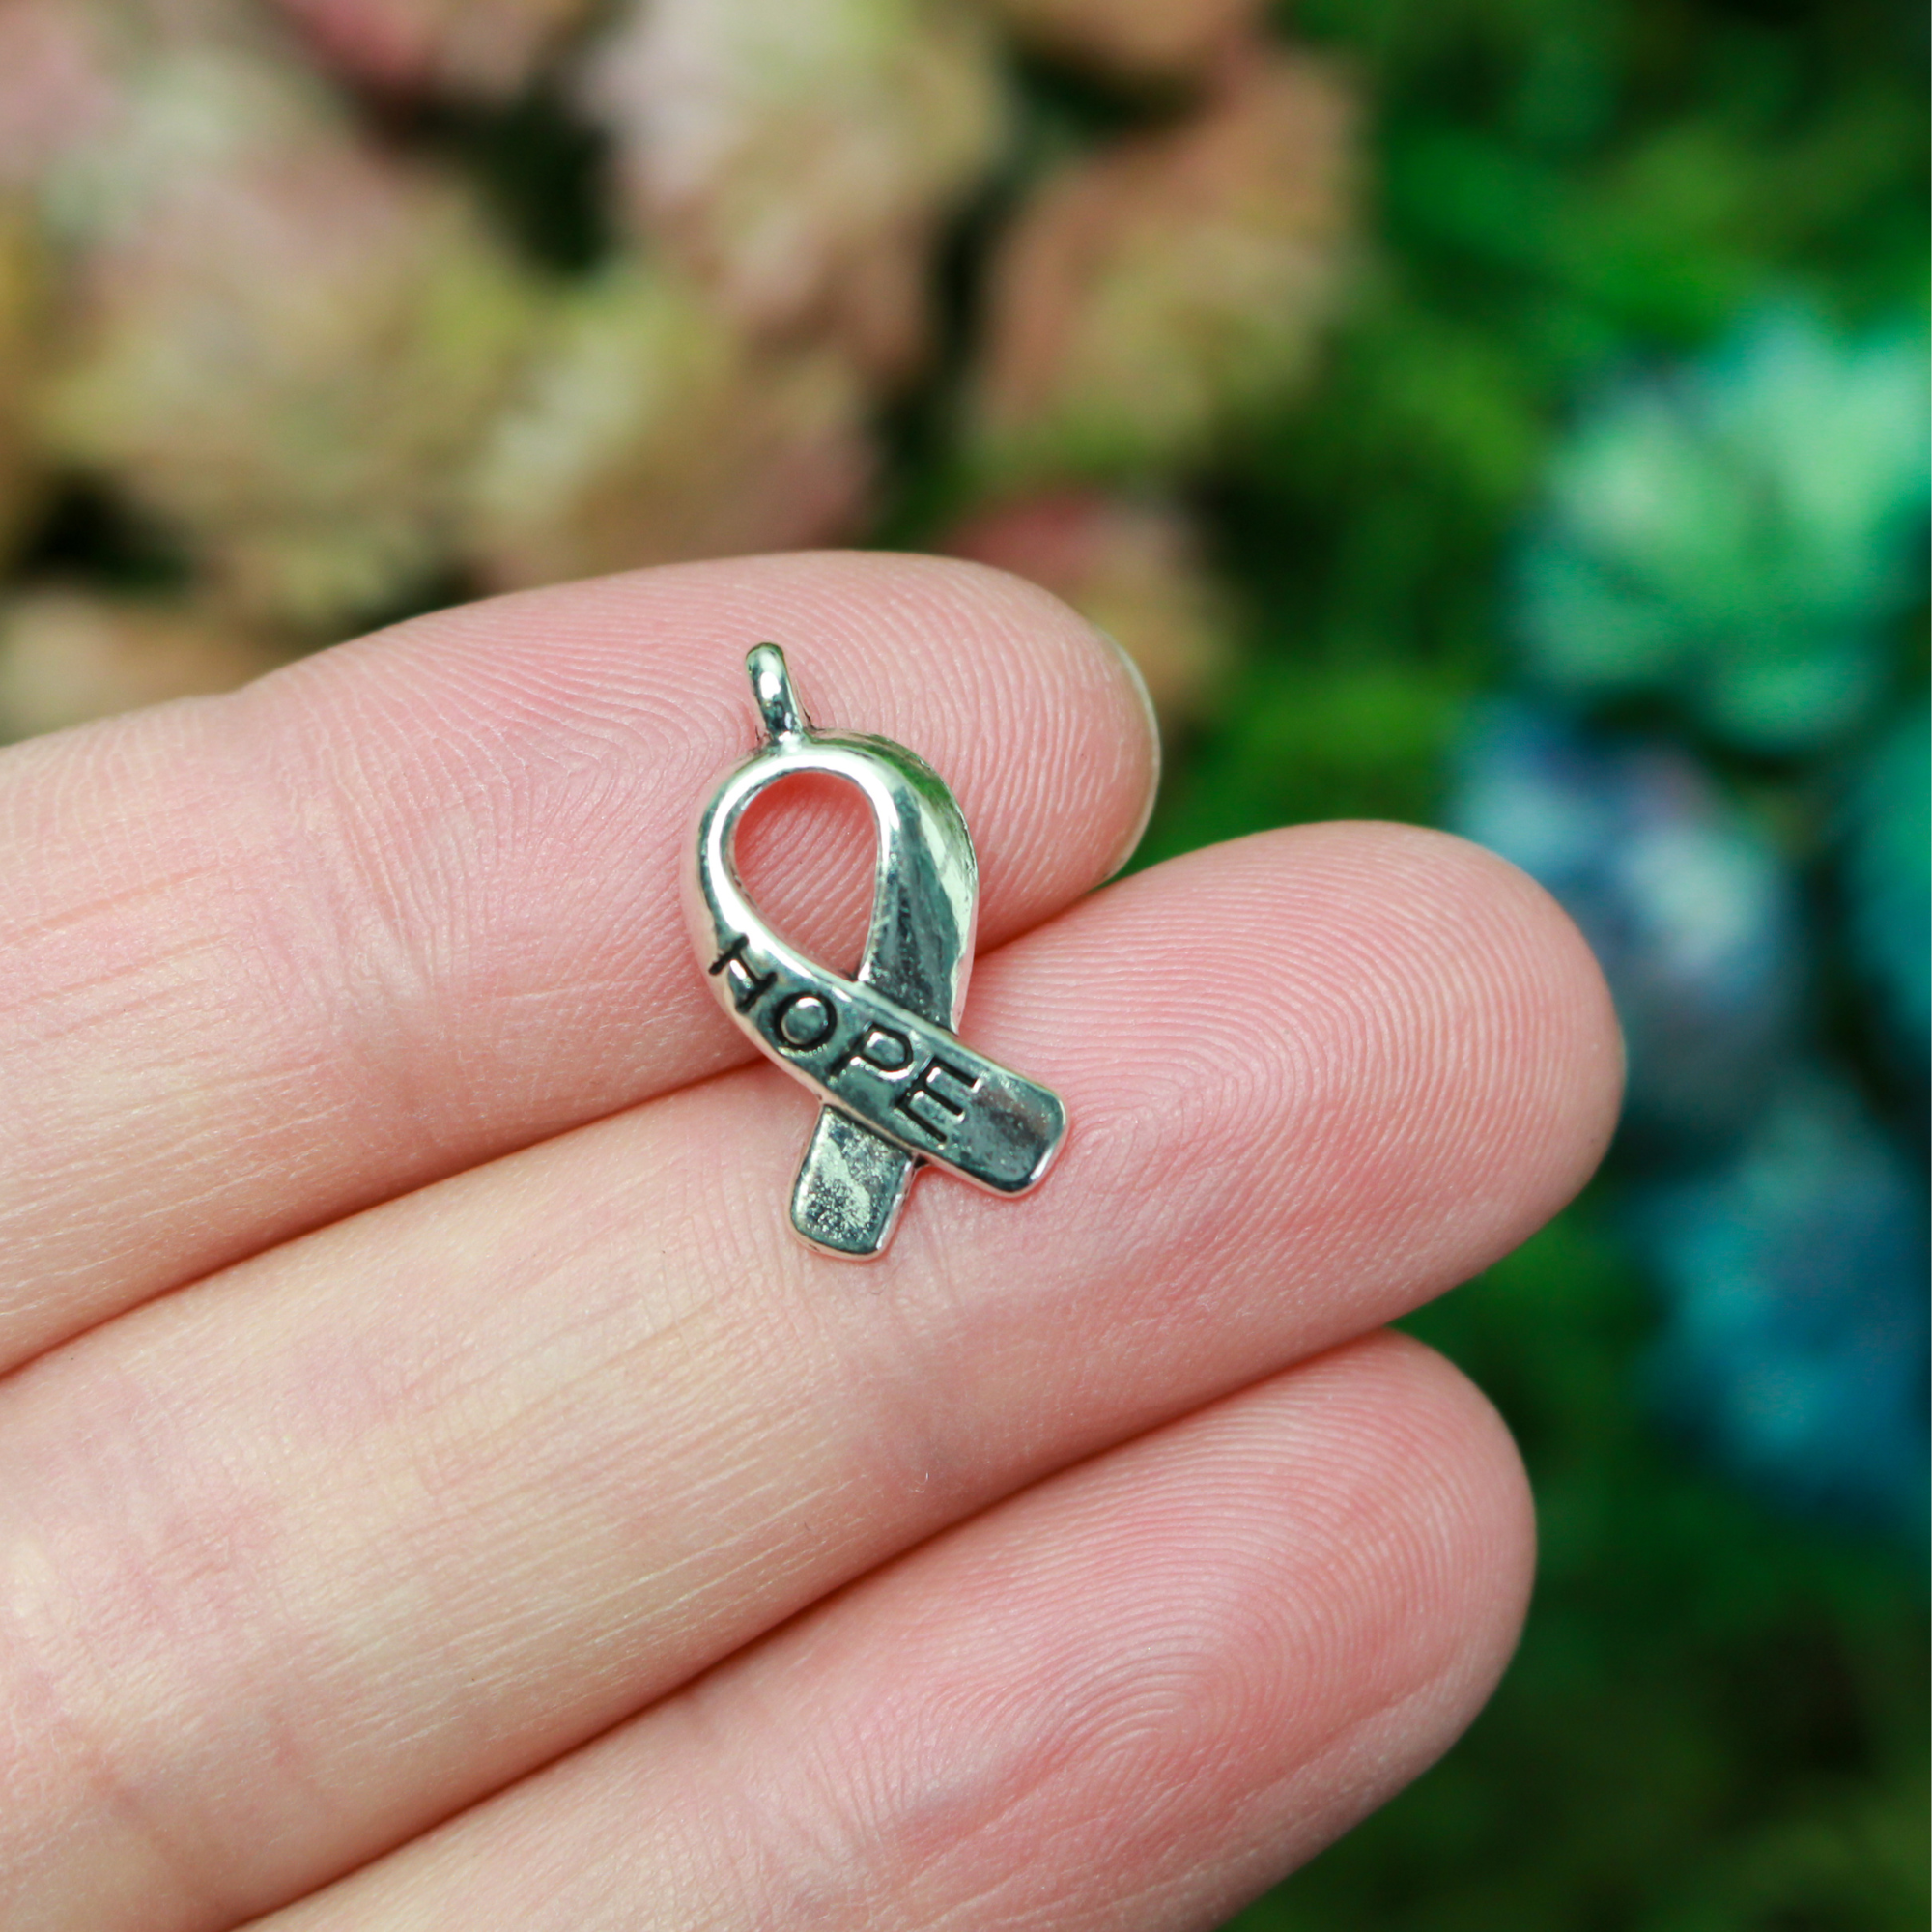 Silver awareness ribbon charms with the word "HOPE" engraved on the ribbon, 18mm long